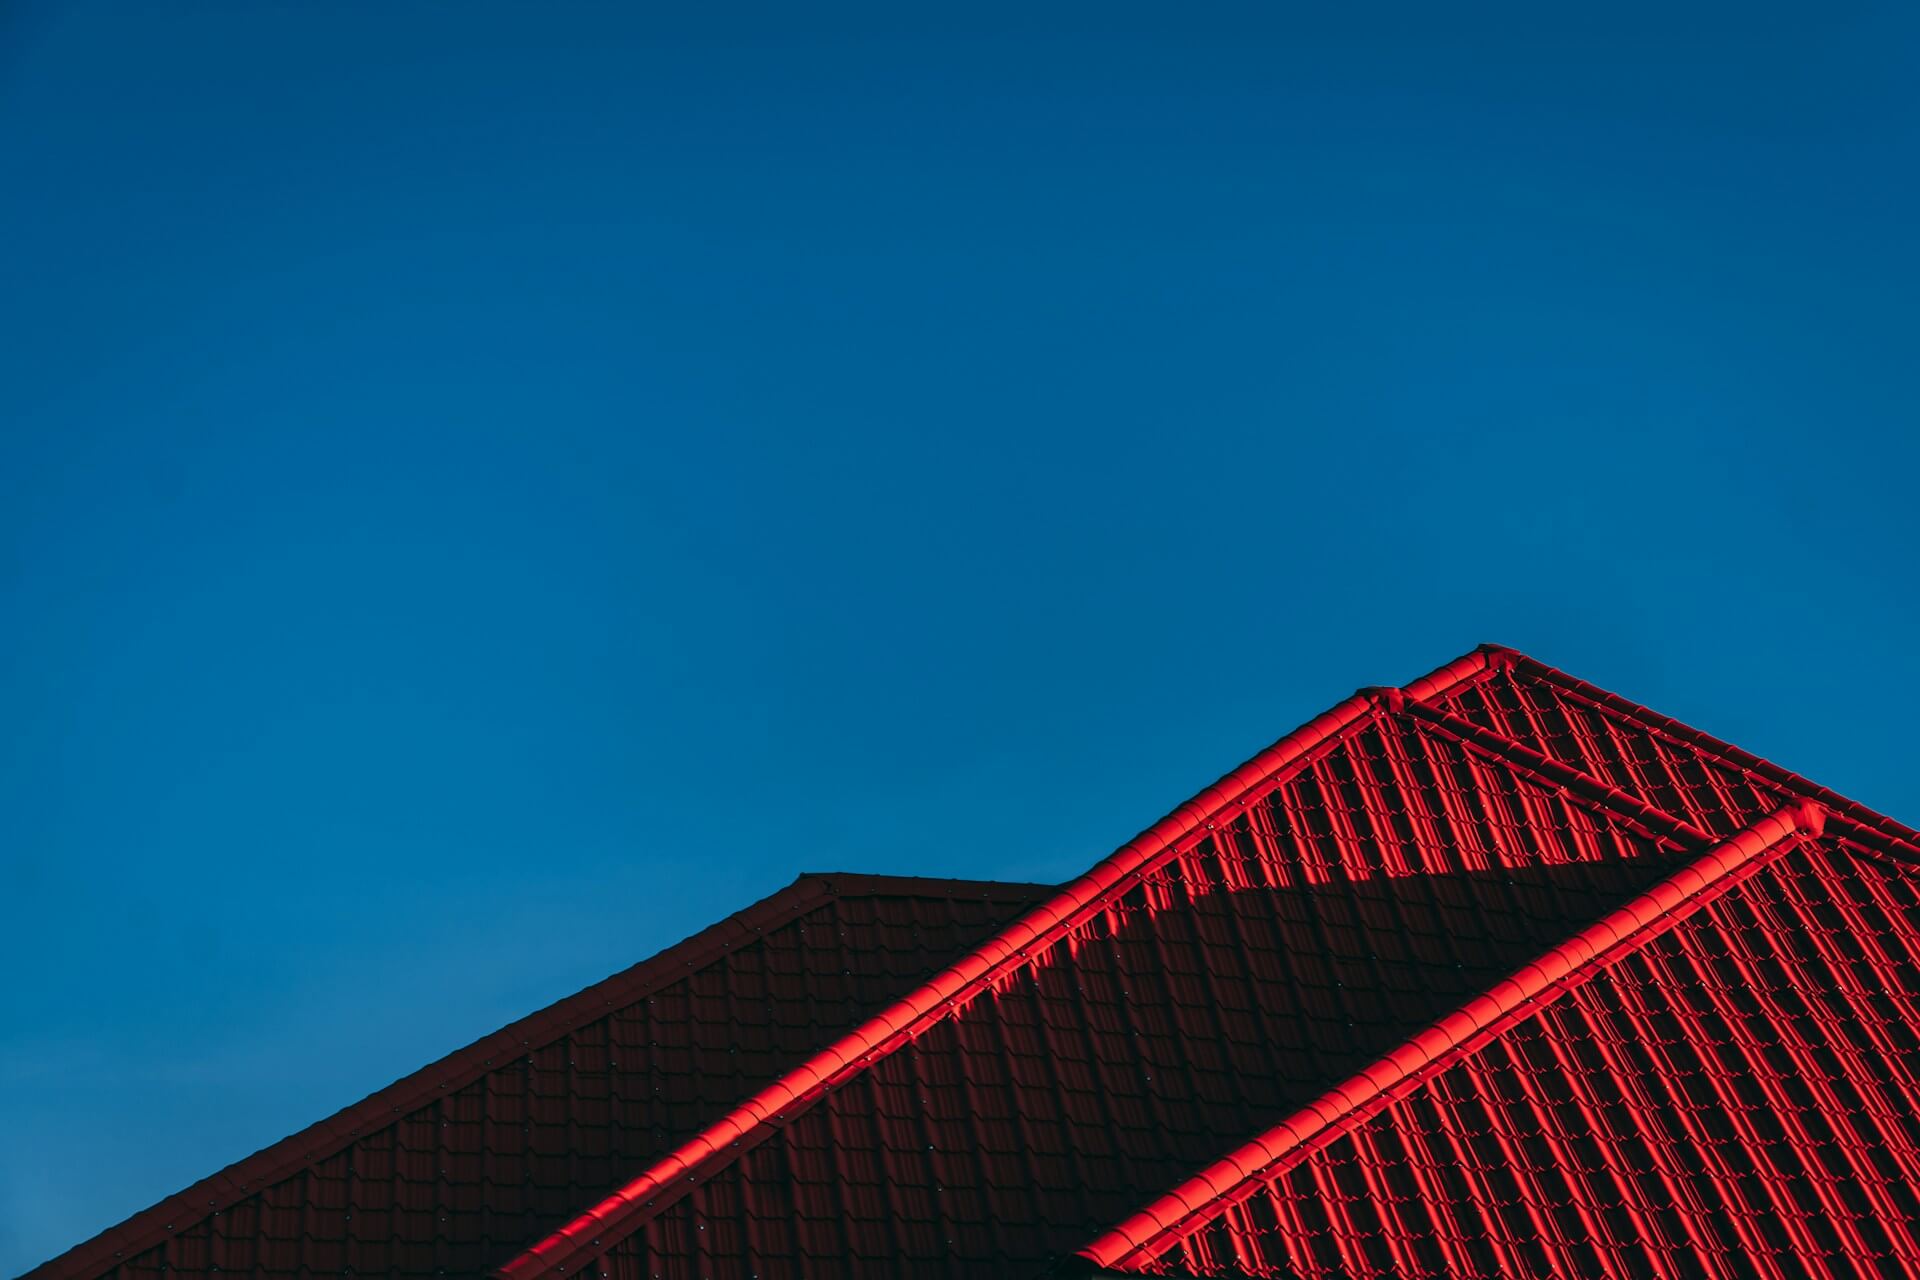 Red roof, blue sky. Image by Unsplash